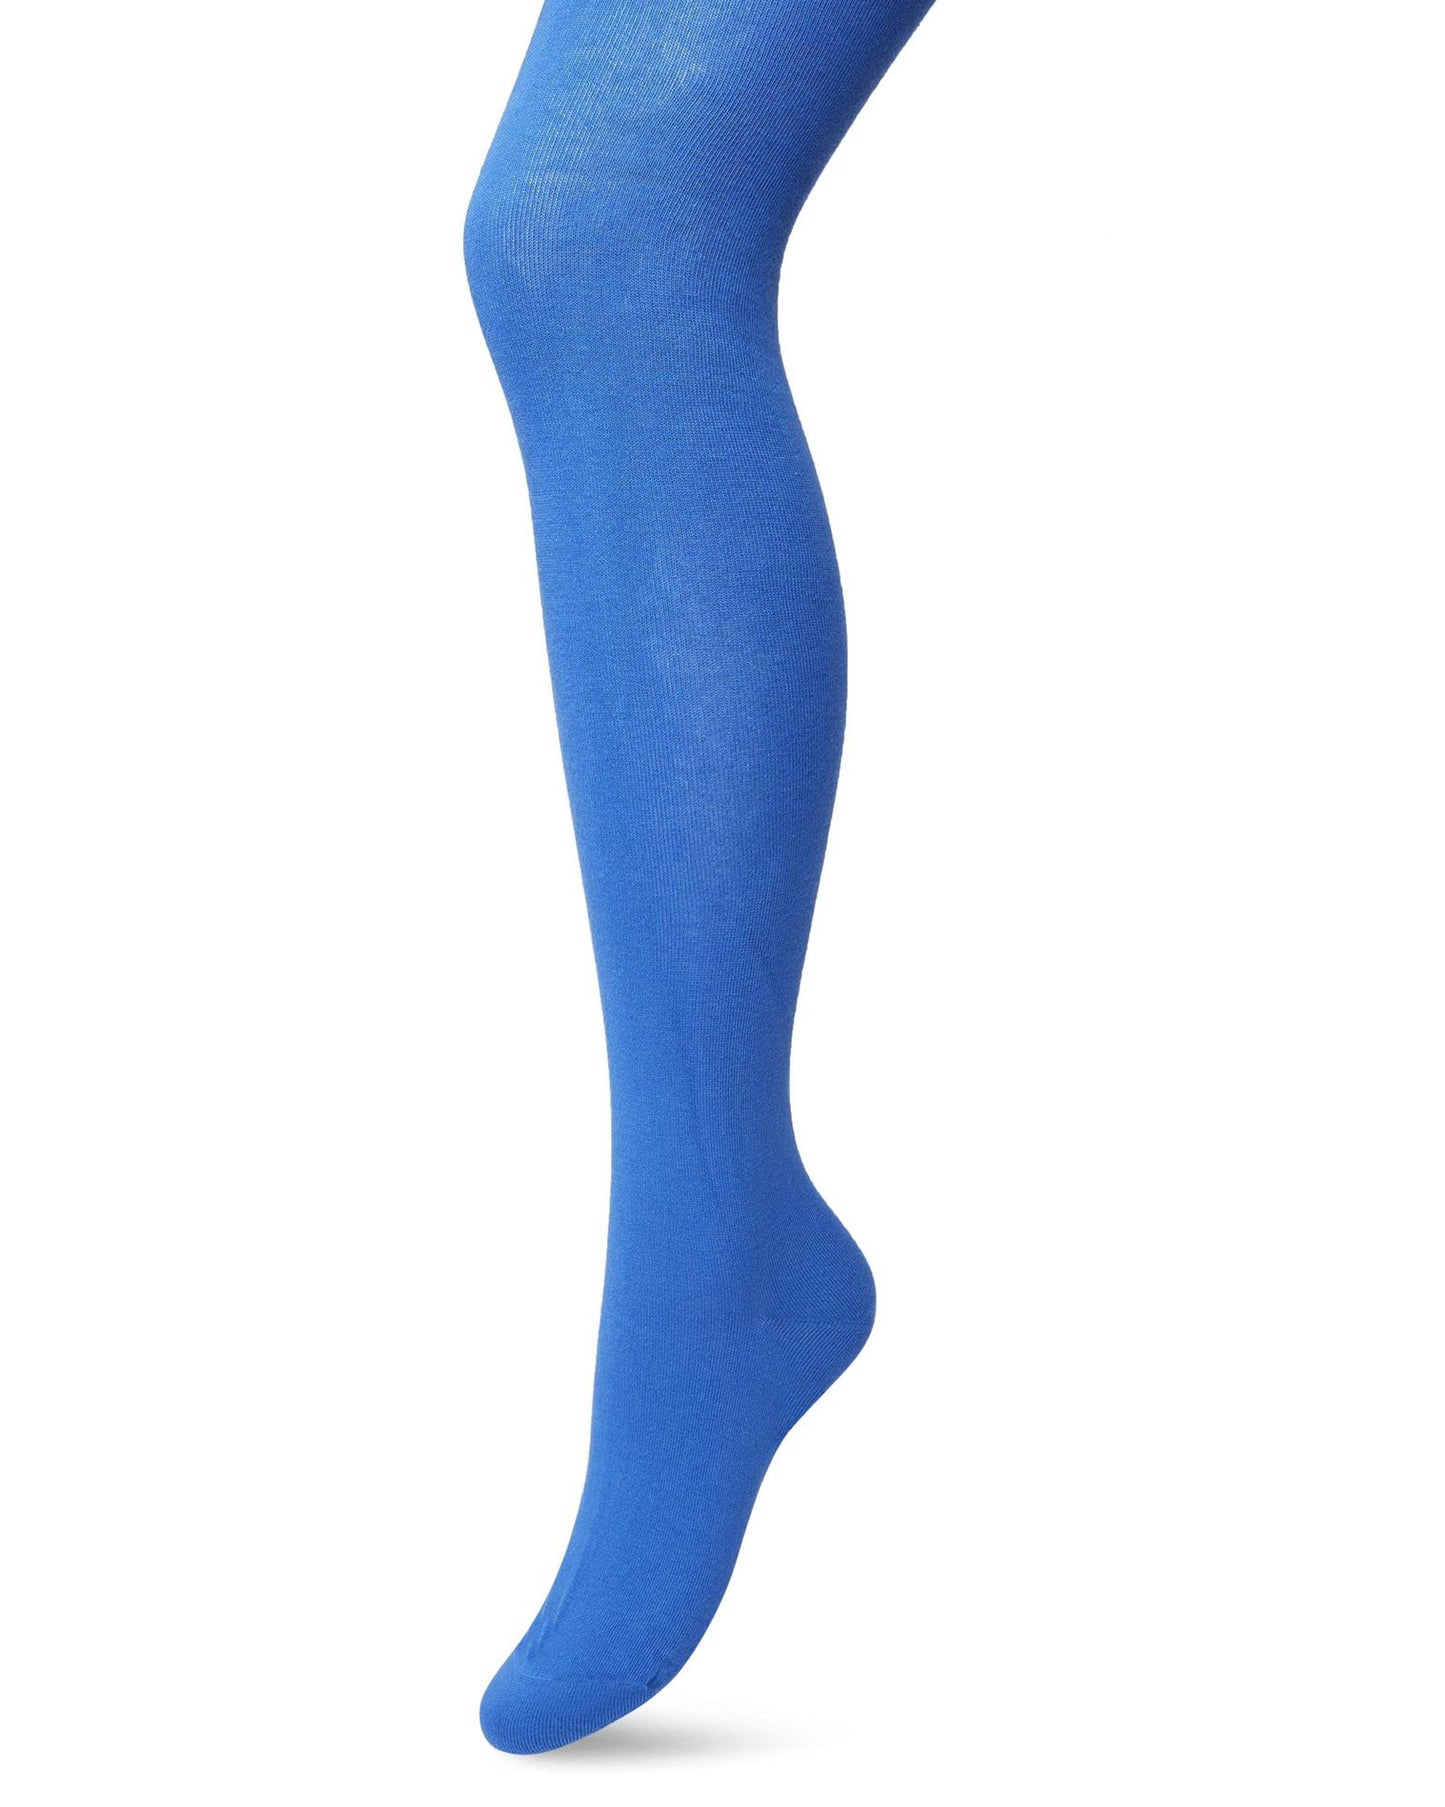 Bonnie Doon Bio Cotton Tights - Bright electric royal blue (strong blue) warm and soft knitted organic cotton Winter thermal tights.